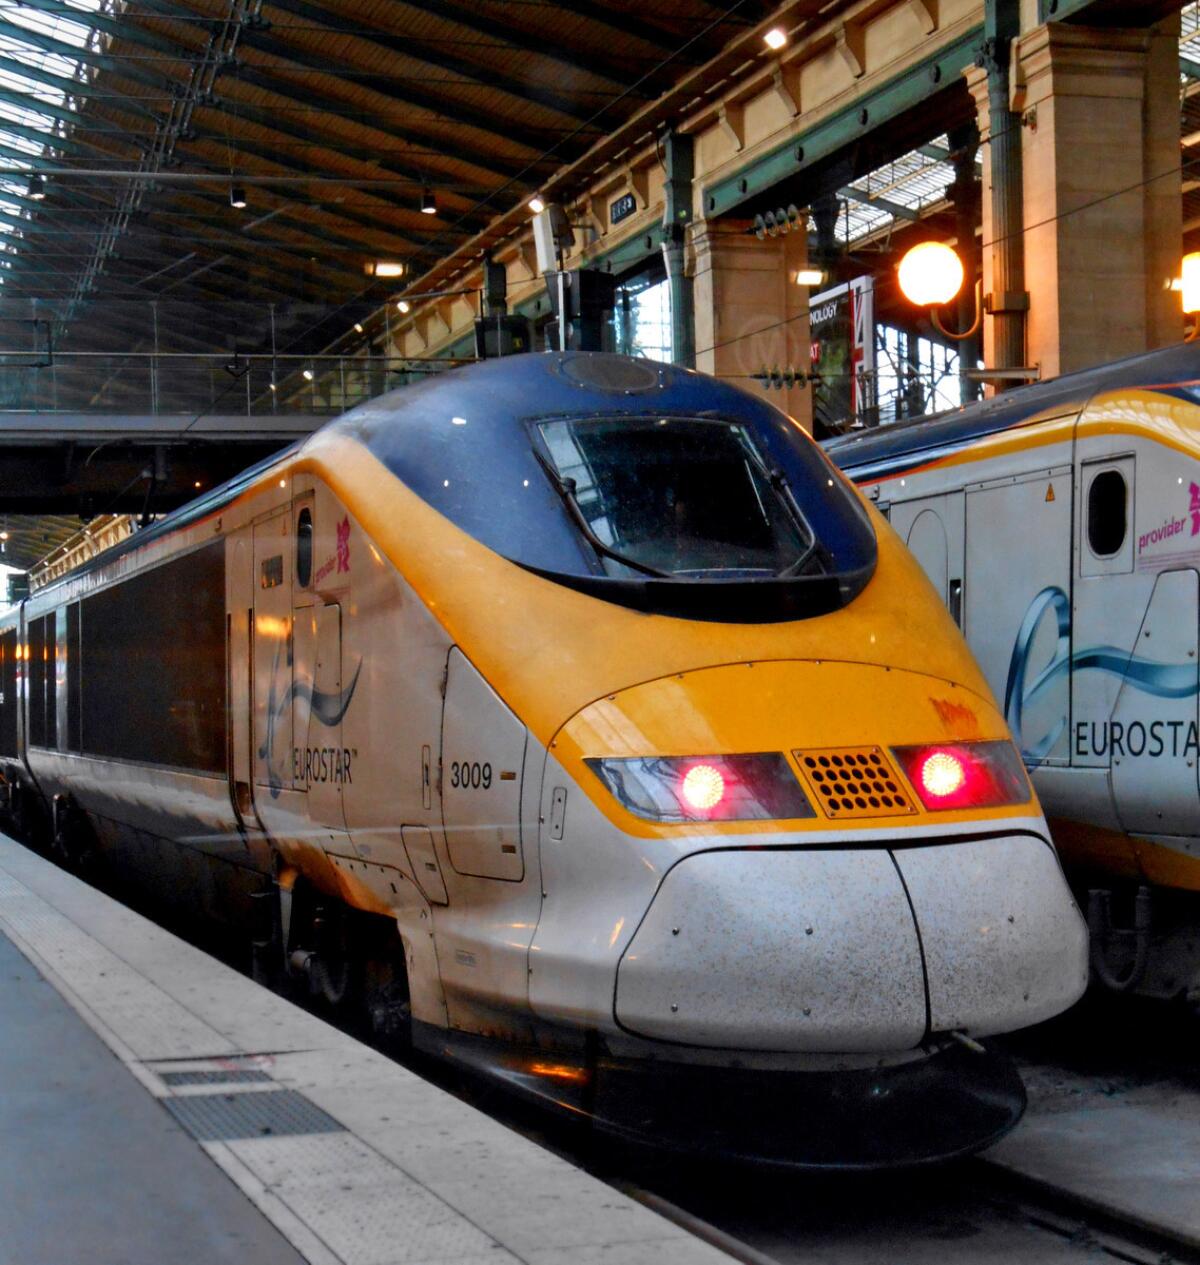 Eurostar trains travel from the heart of London to Paris in less than two and a half hours.